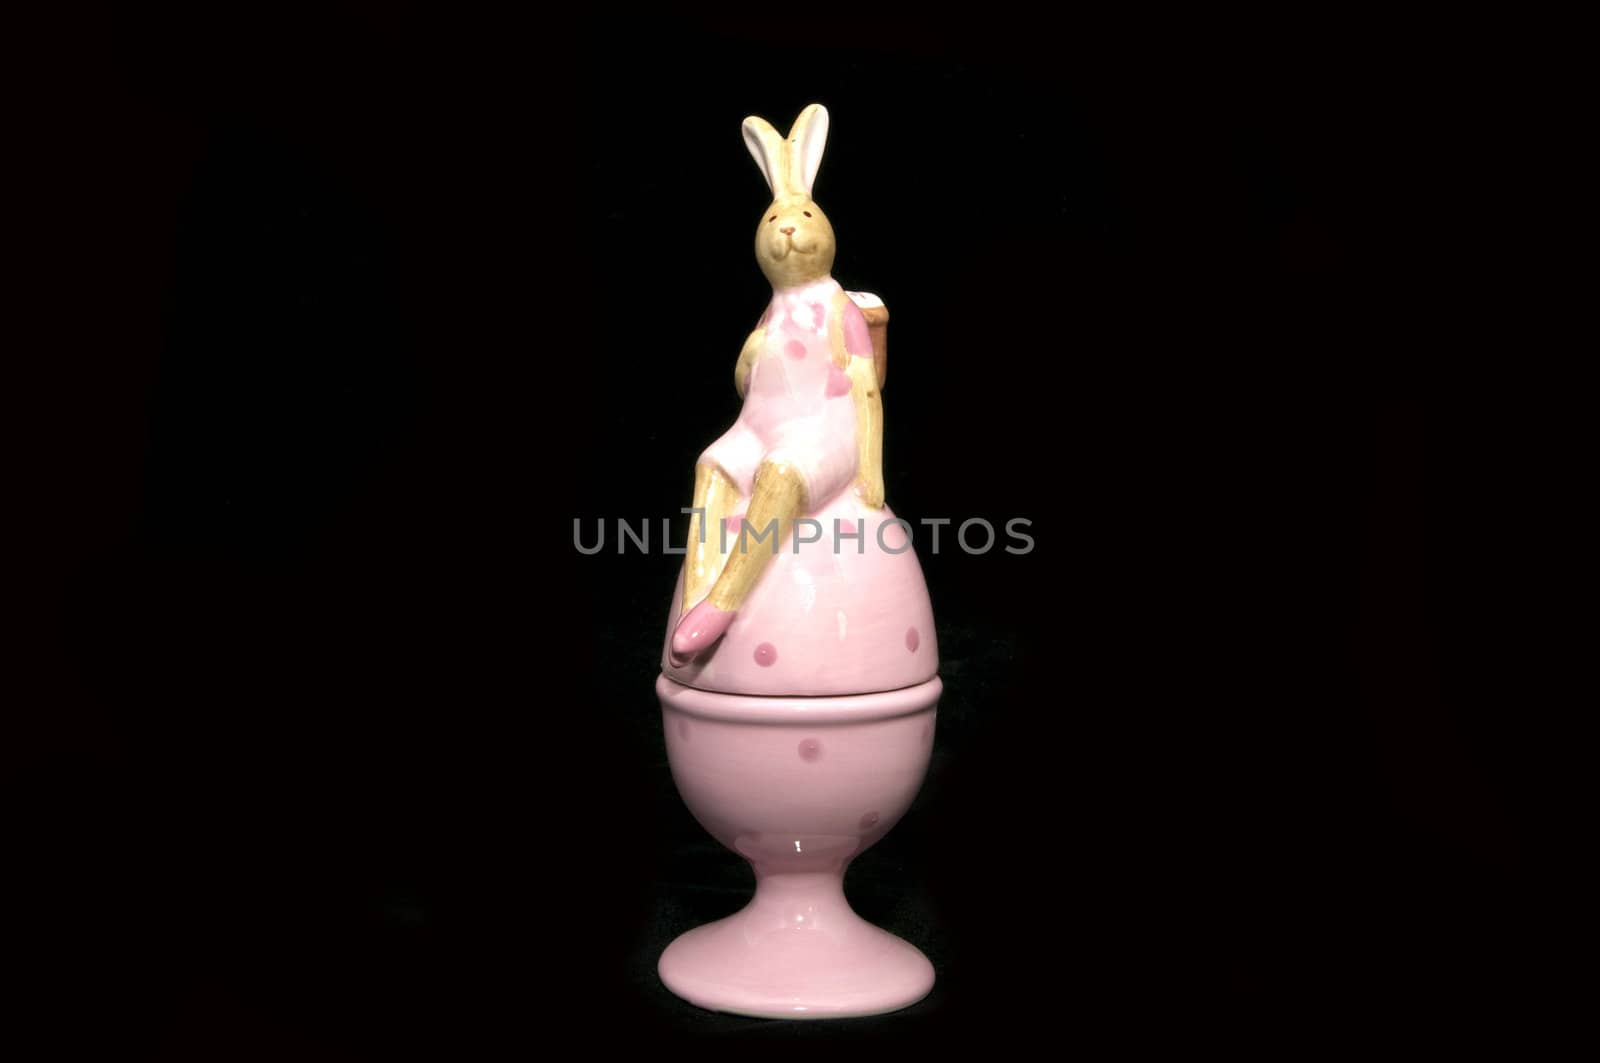 Ceramic Easter Bunny at the egg on a black background